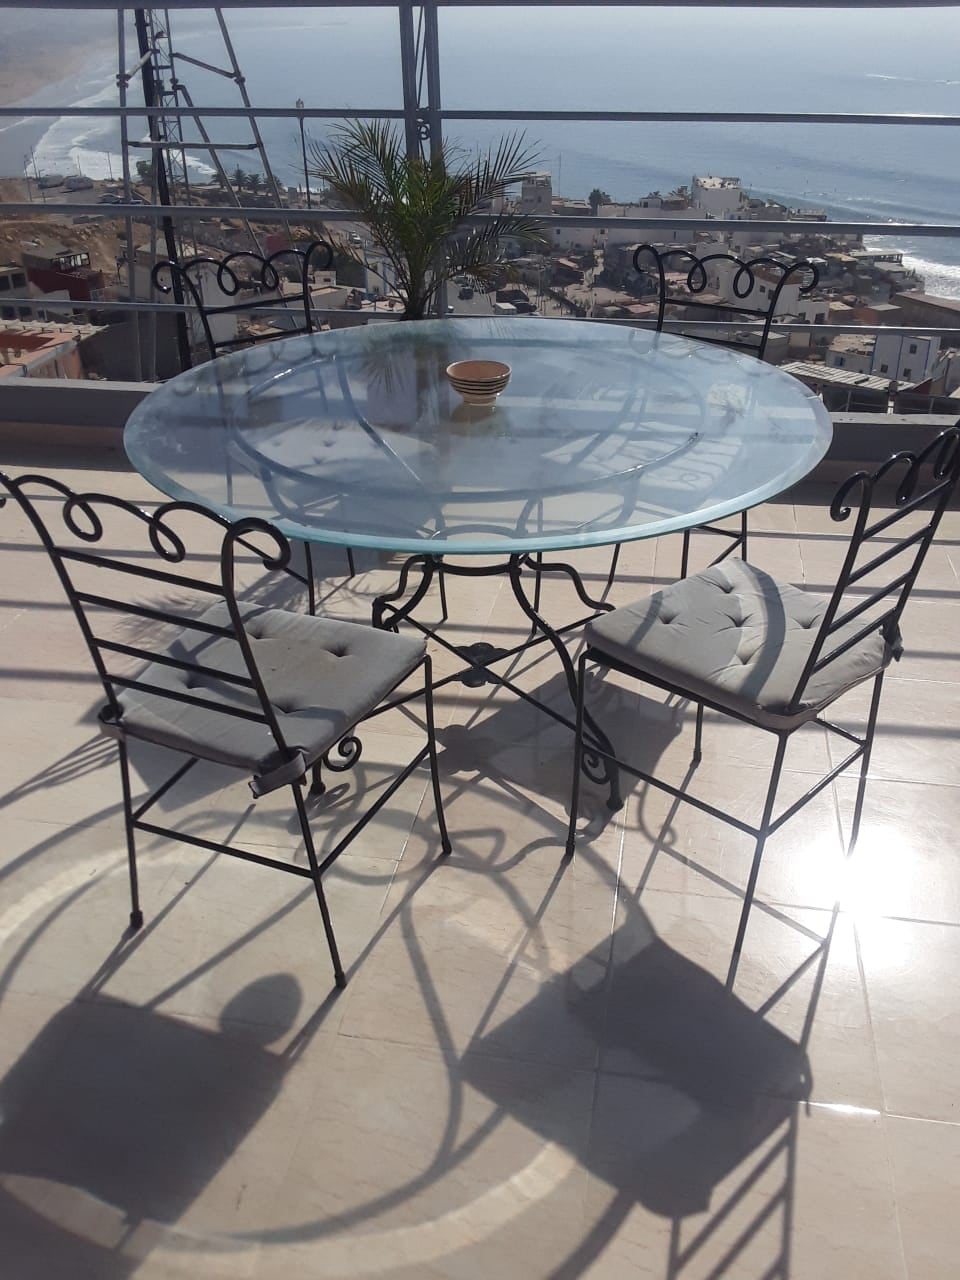 Taghazout appartement surf and Yoga